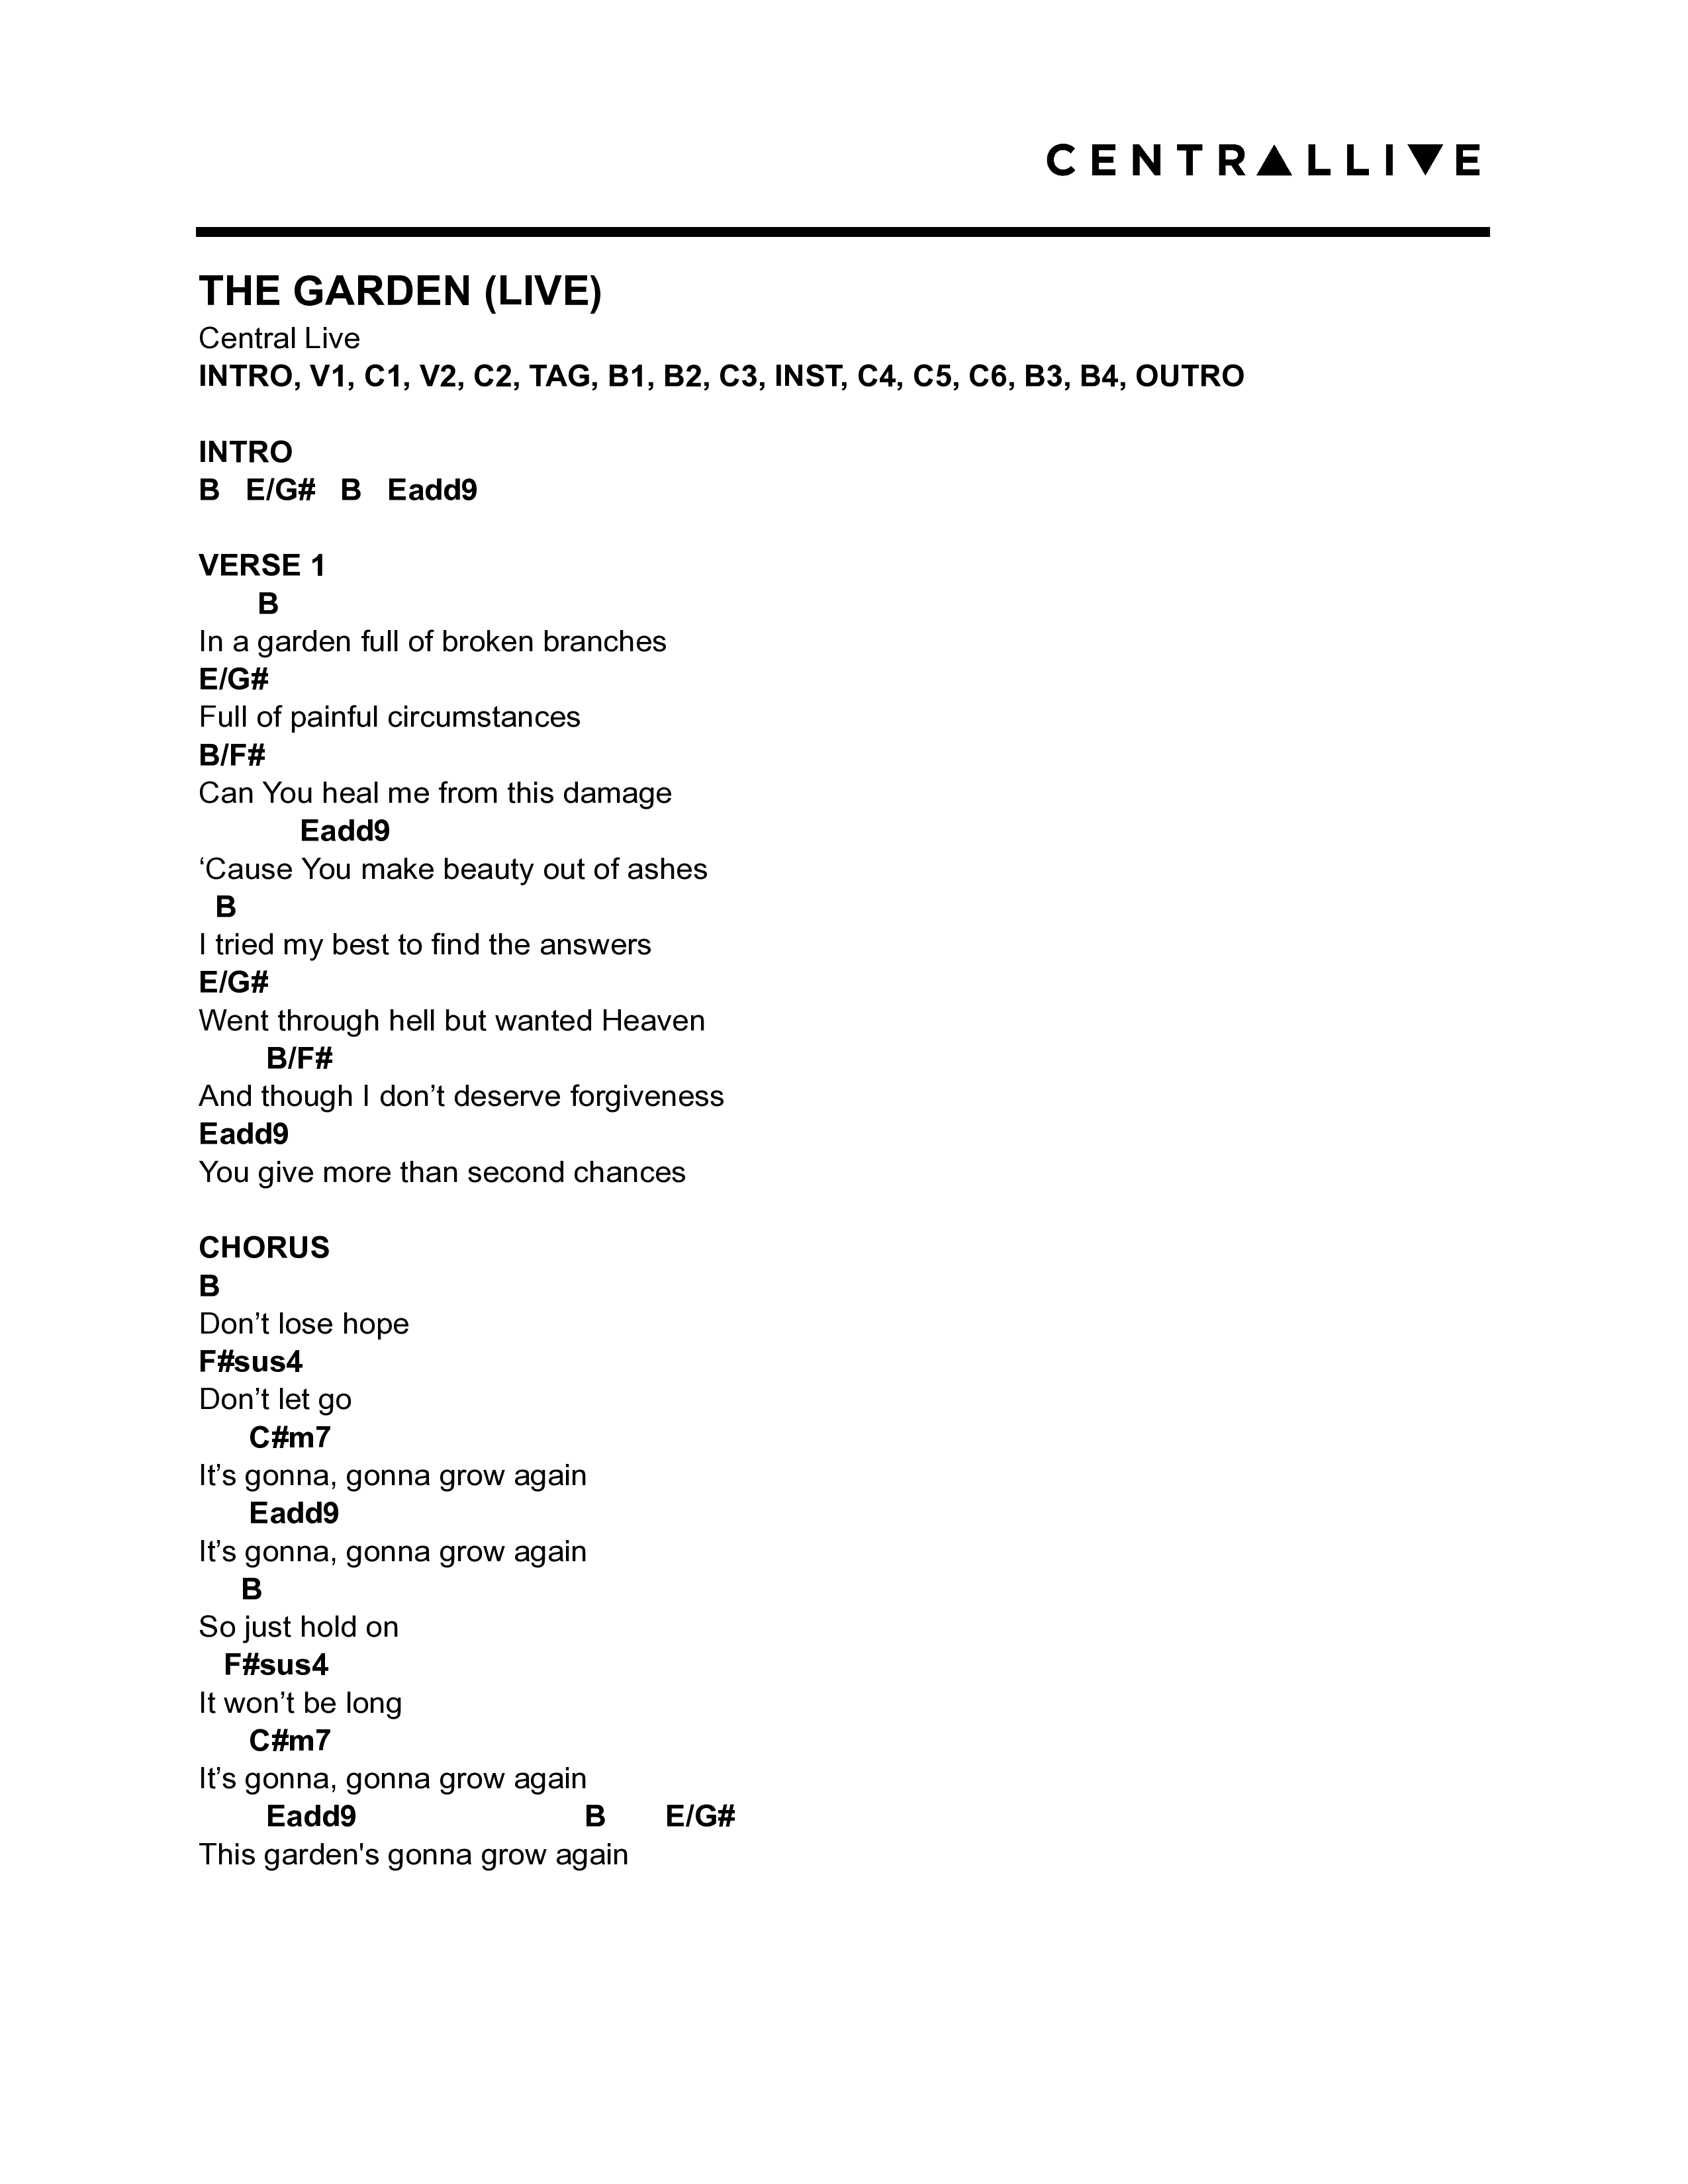 The Garden (Live) Chord Chart (Central Live)